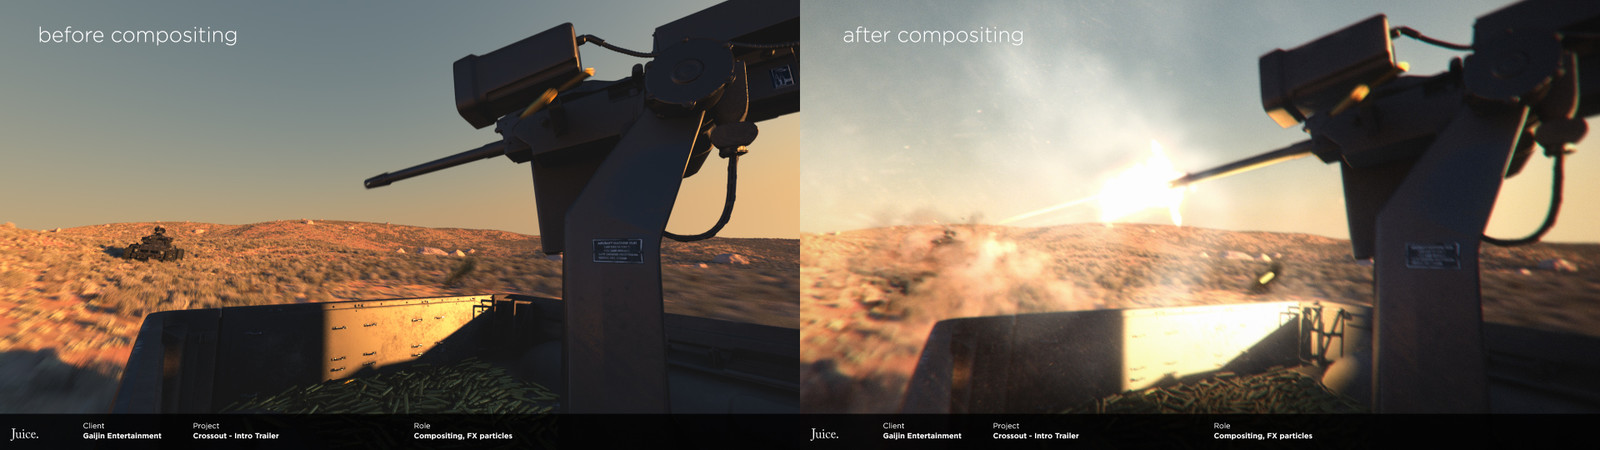 Before and after compositing